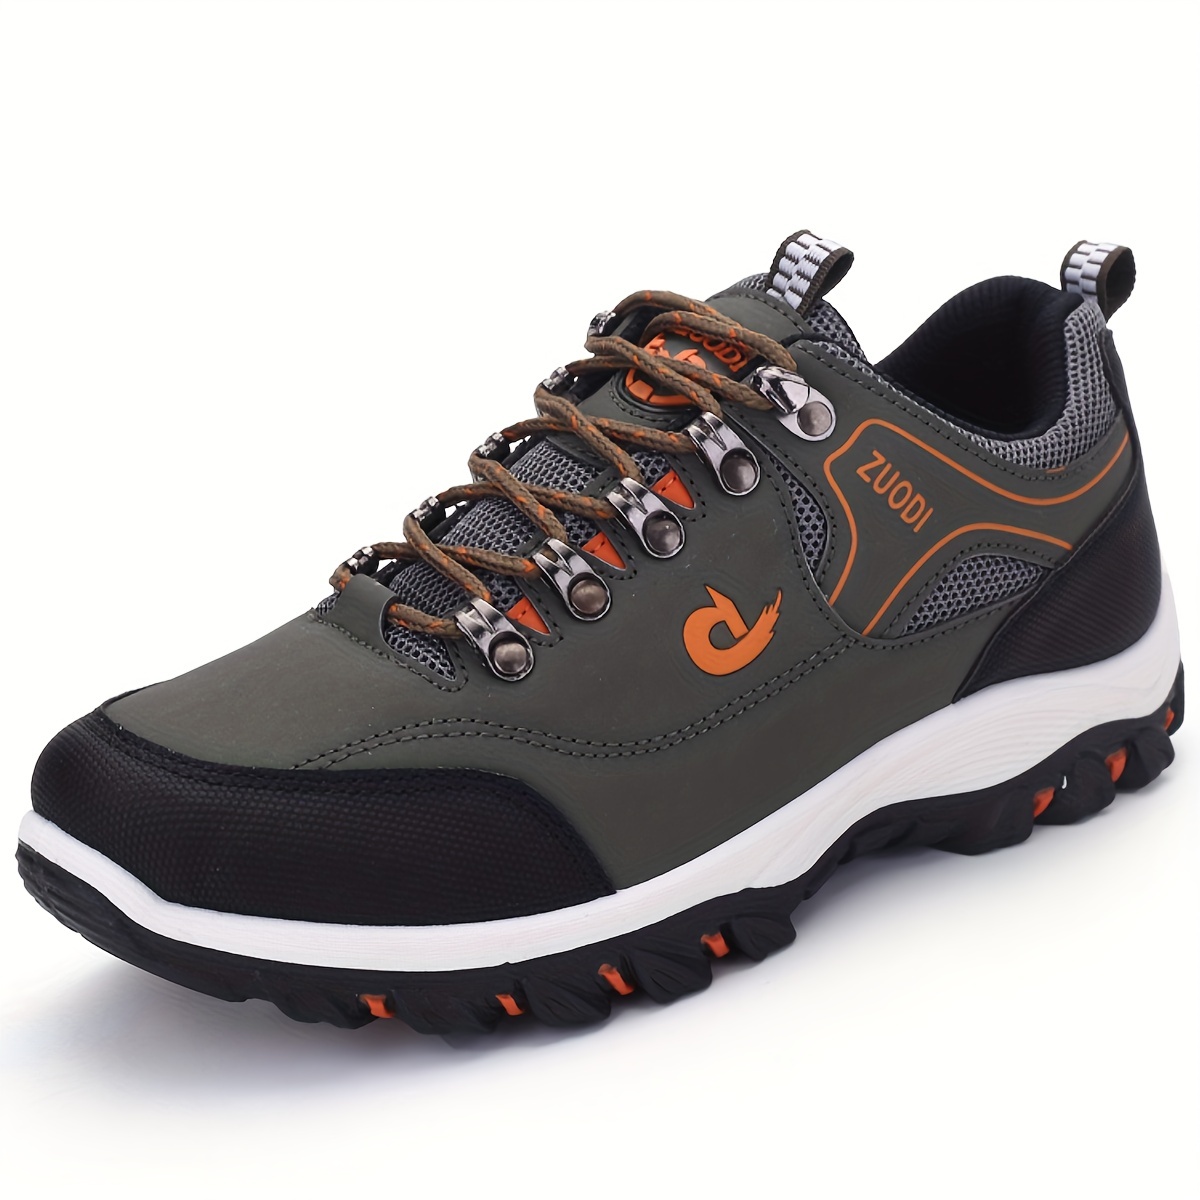 Men's Outdoor Casual Comfortable Light Shoes (Buy 2 Free Shipping)